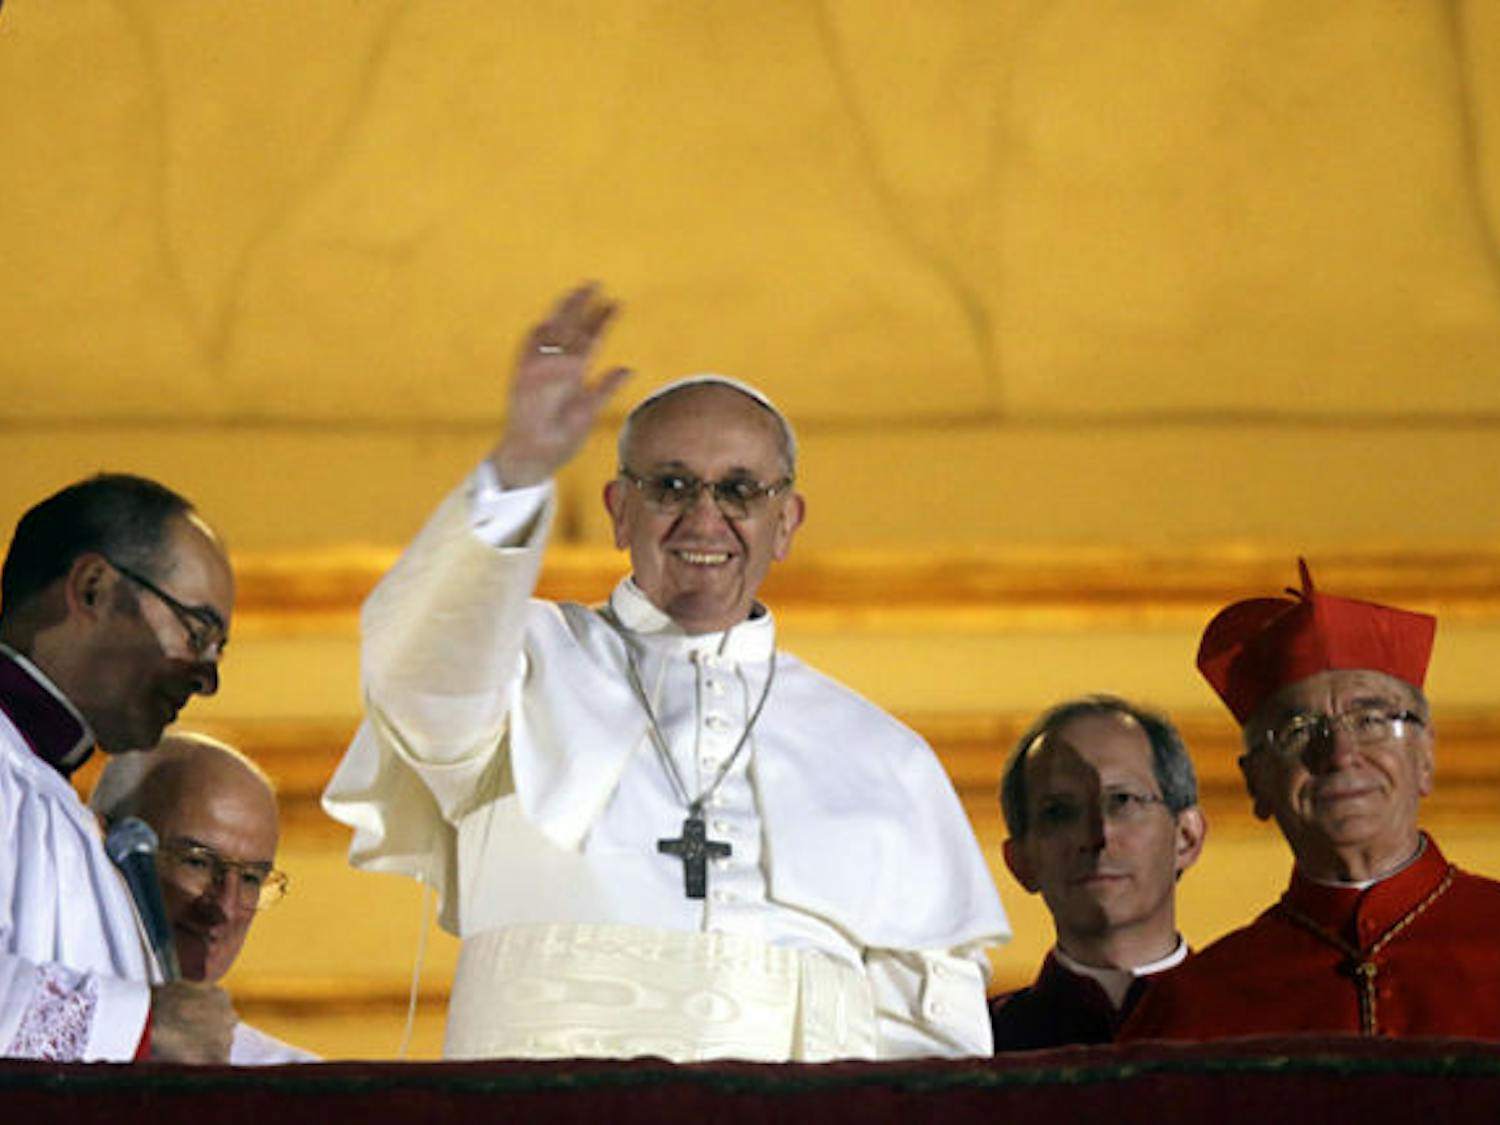 Pope Francis I waves from the central balcony of St. Peter’s Basilica at the Vatican on Wednesday. Cardinal Jorge Mario Bergoglio, who chose the papal name of Francis, is the 266th pontiff of the Roman Catholic Church.